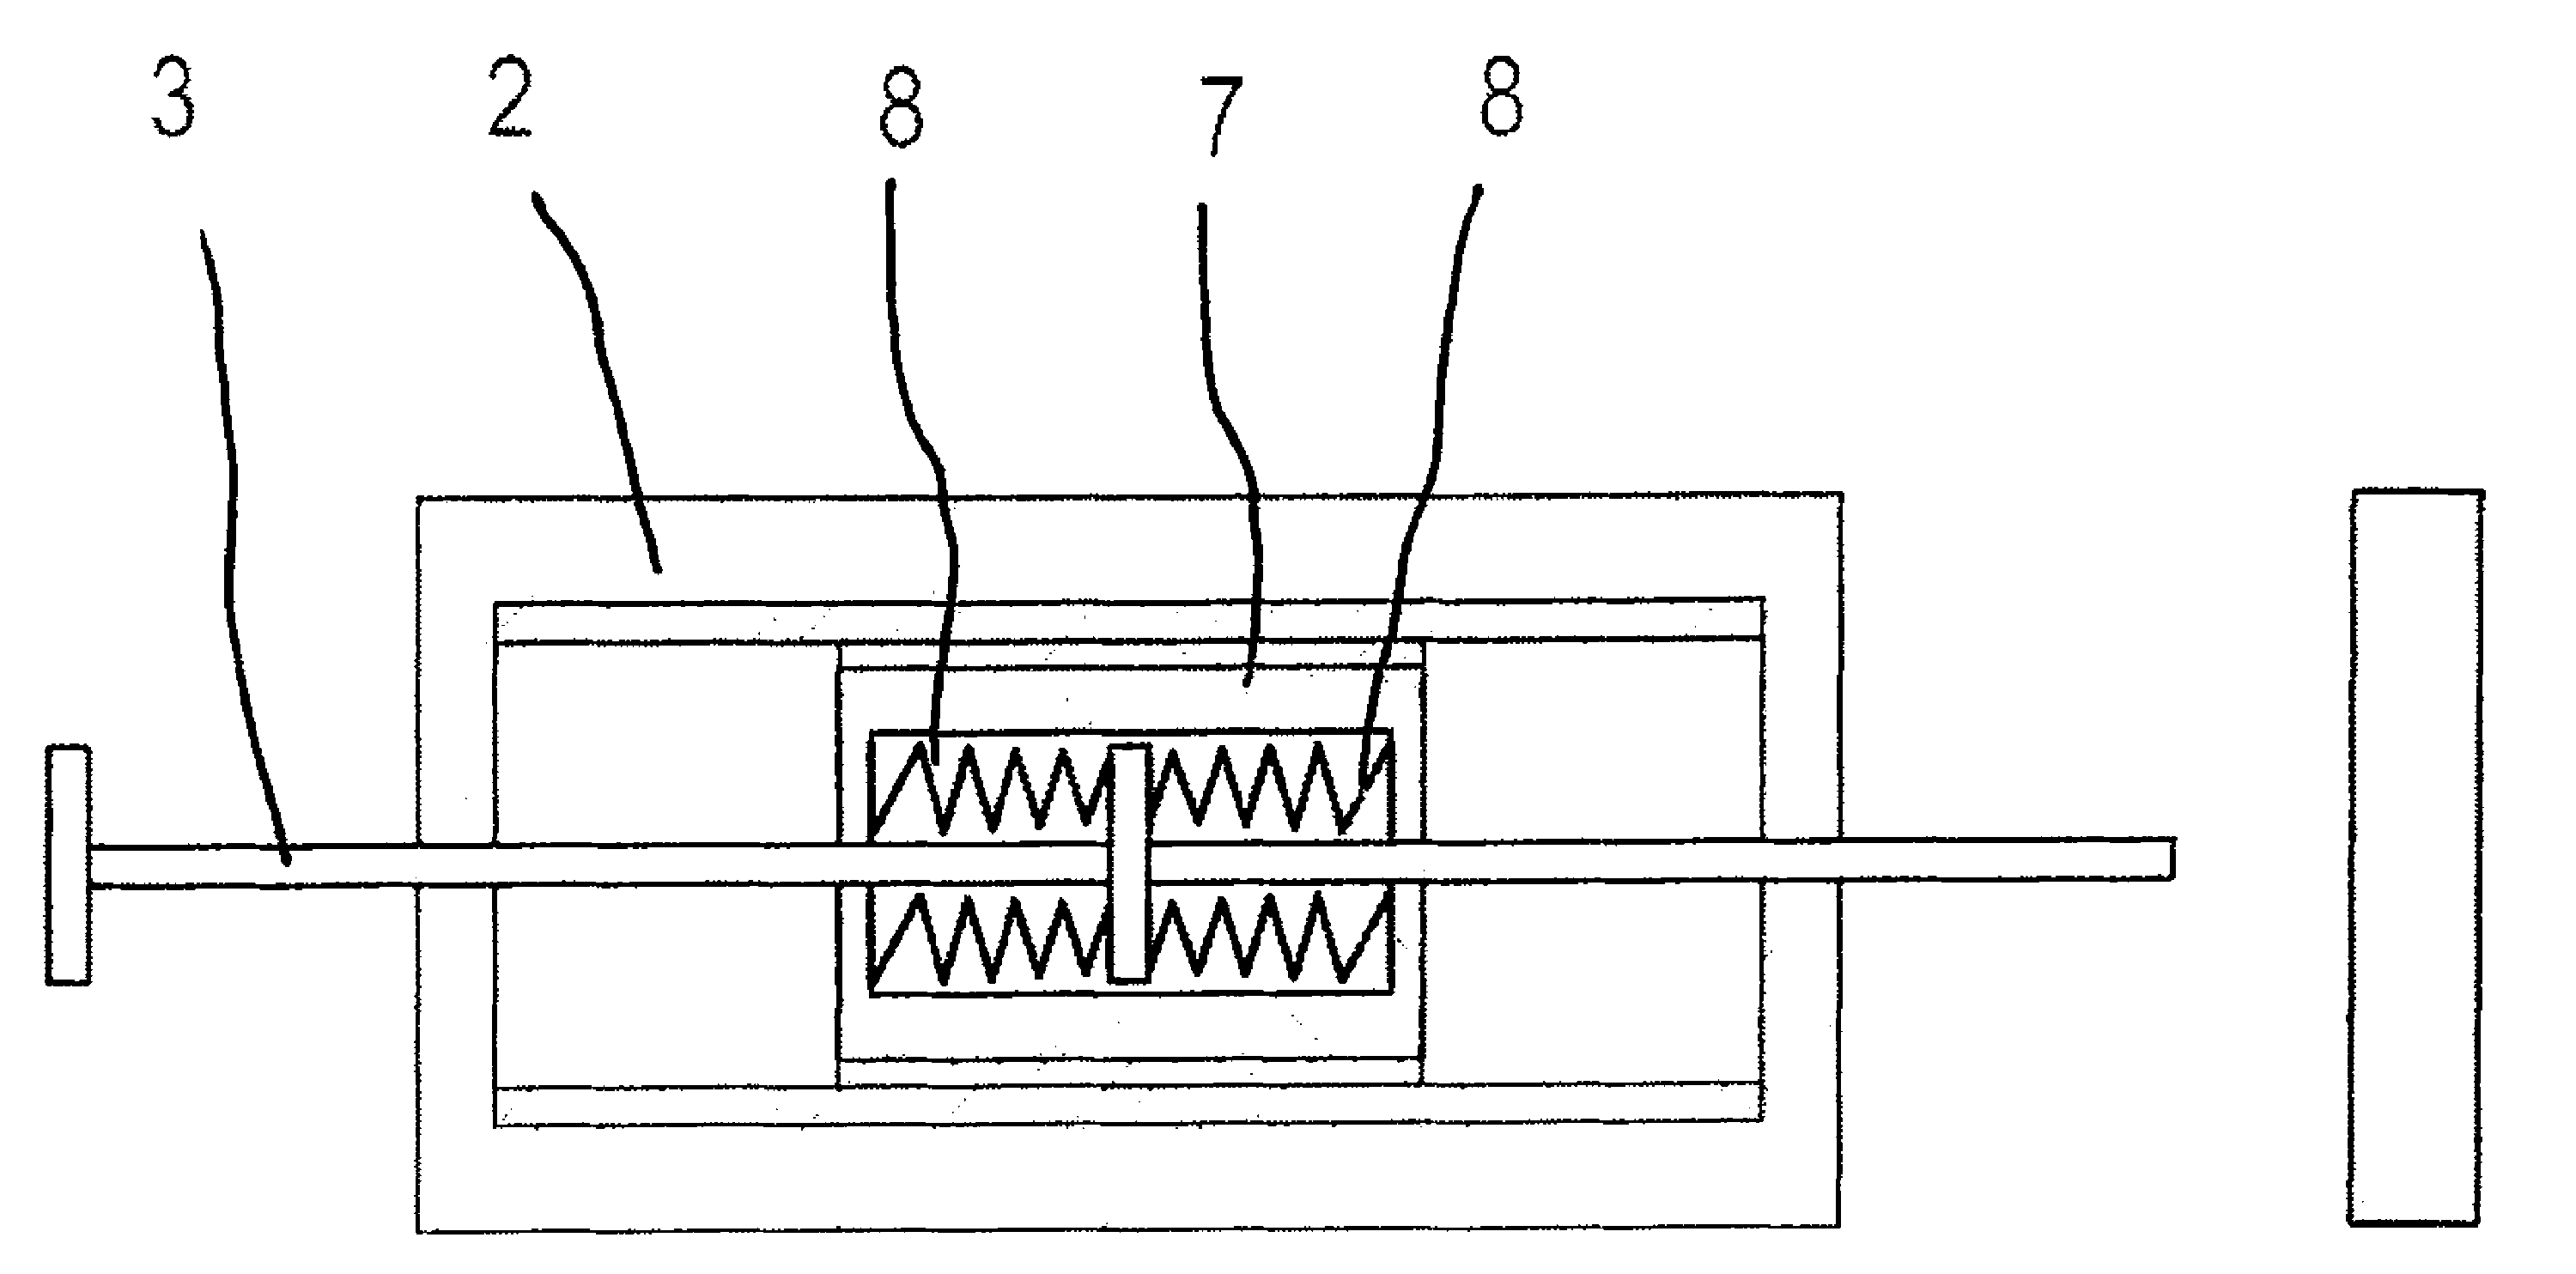 Method for clamping a tool or a workpiece and device for performing the method